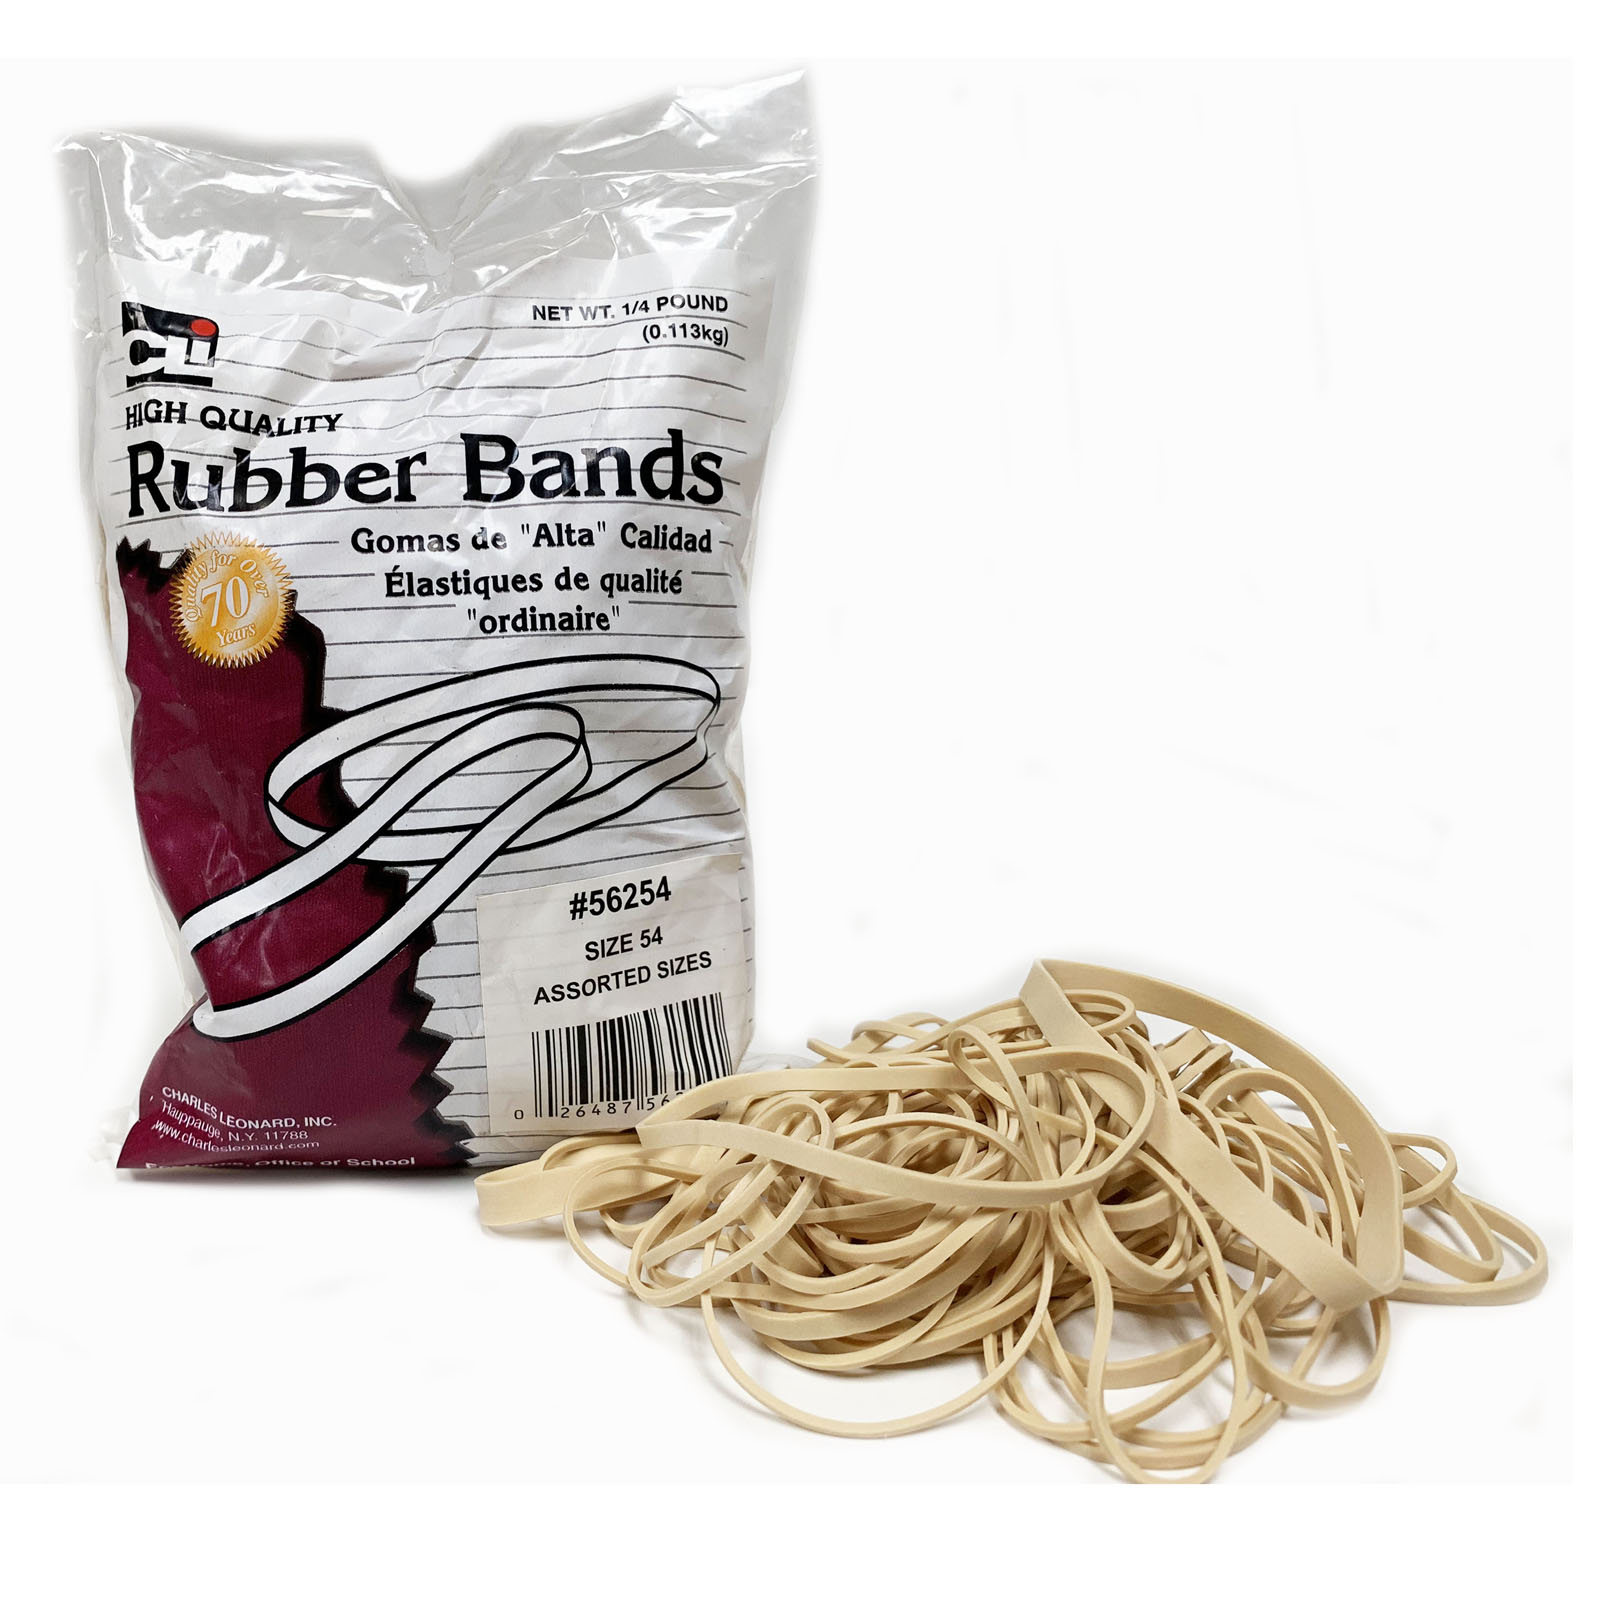 Rubber Bands, Assorted Sizes, 1/4 lb. Bag